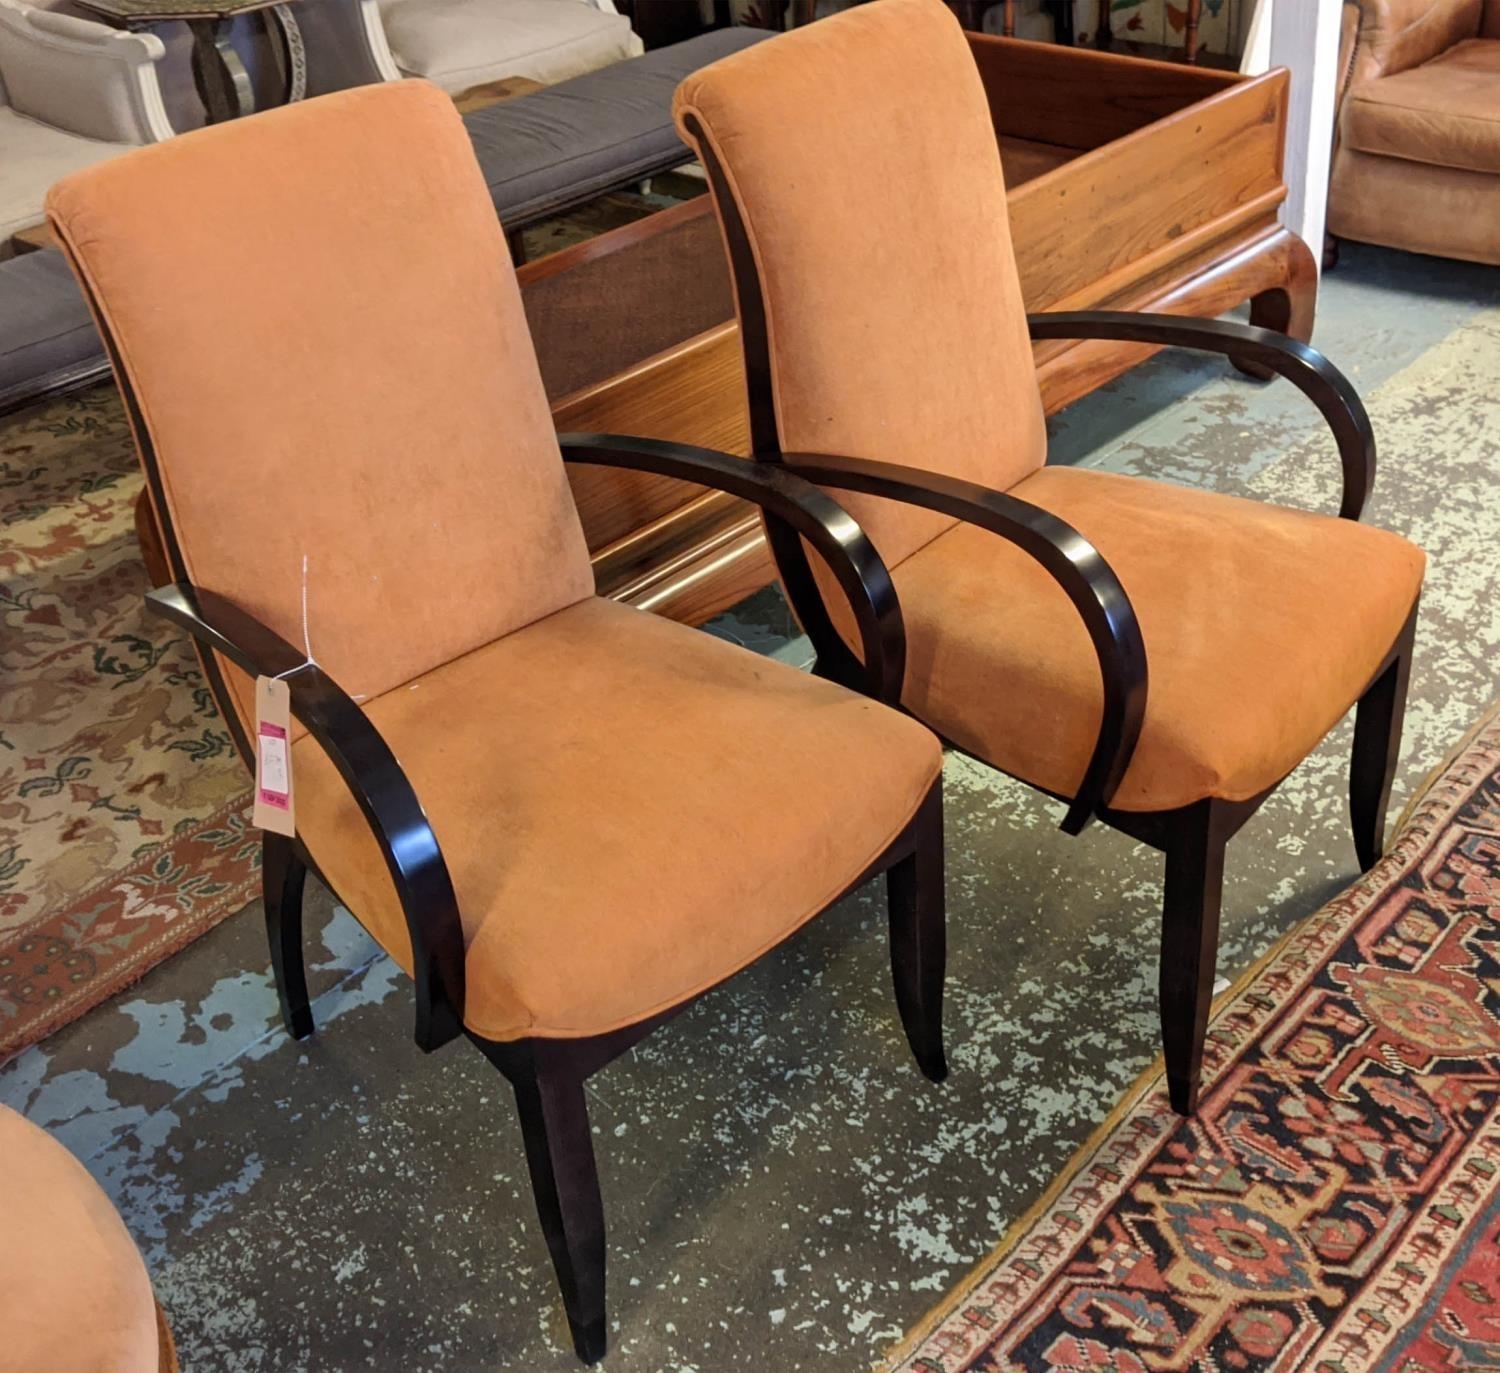 DAVIDSON ART DECO STYLE ARMCHAIRS, a pair each 57cm W x 104cm H, with orange chenille upholstery and